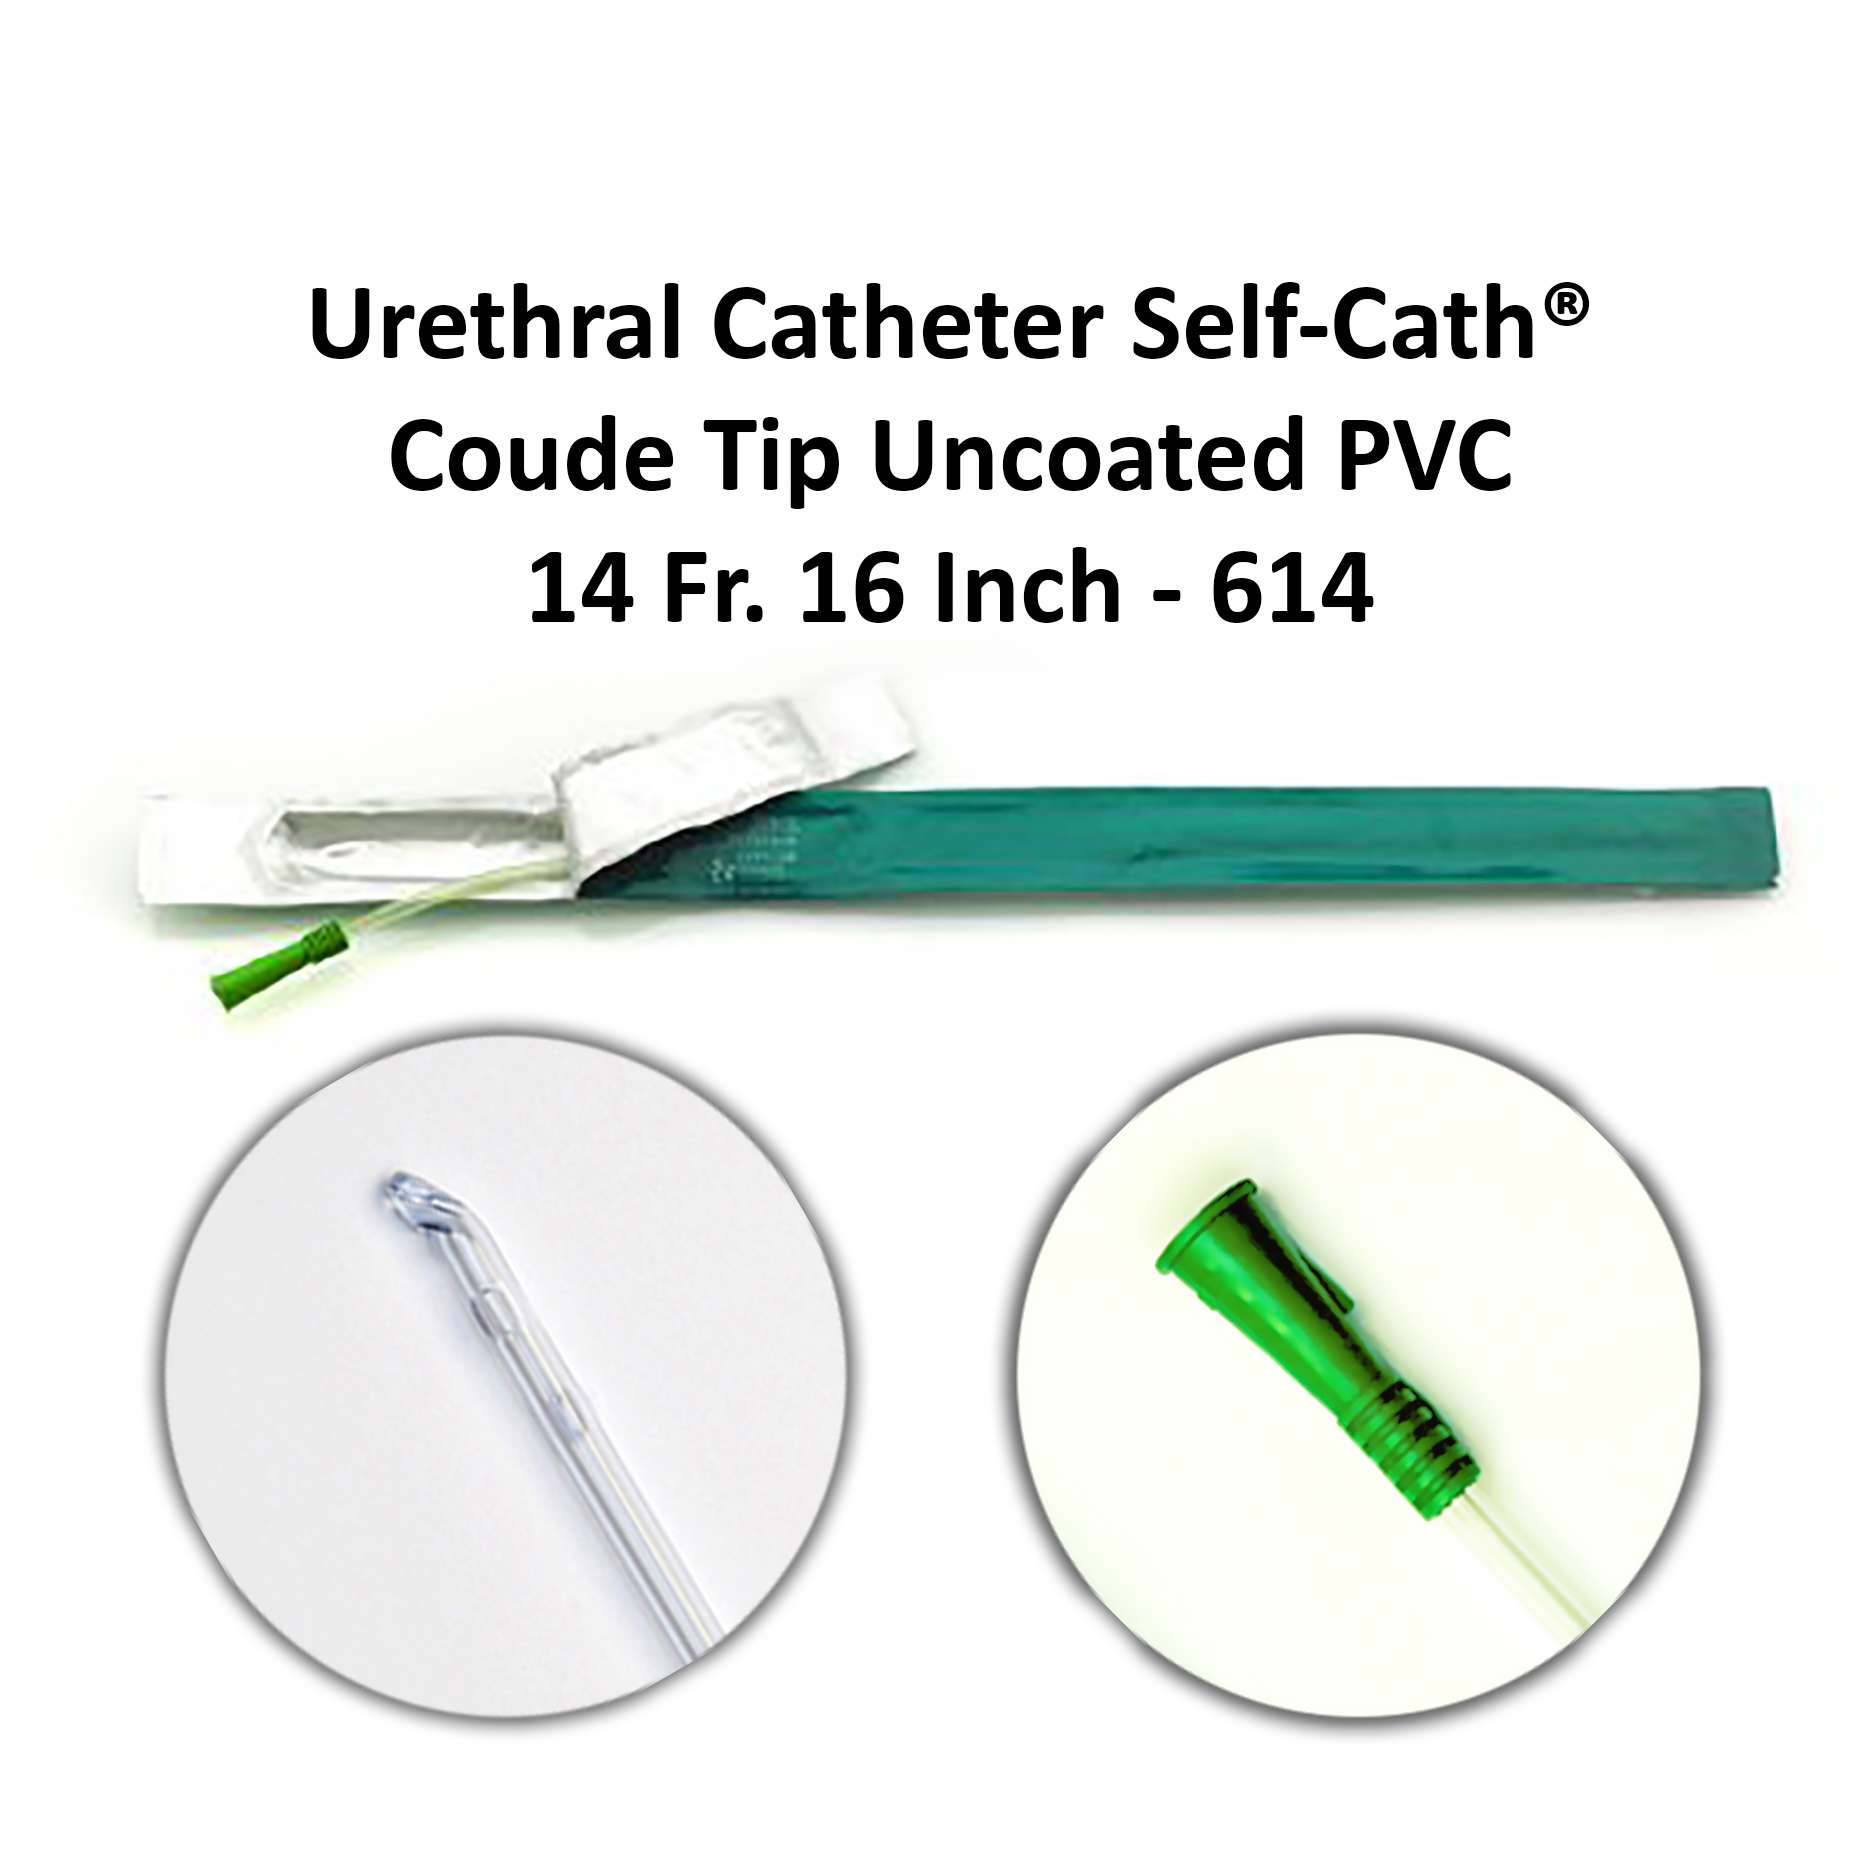 Urethral Catheter Self-Cath® Coude Tip Uncoated PVC 14 Fr. 16 Inch - 614